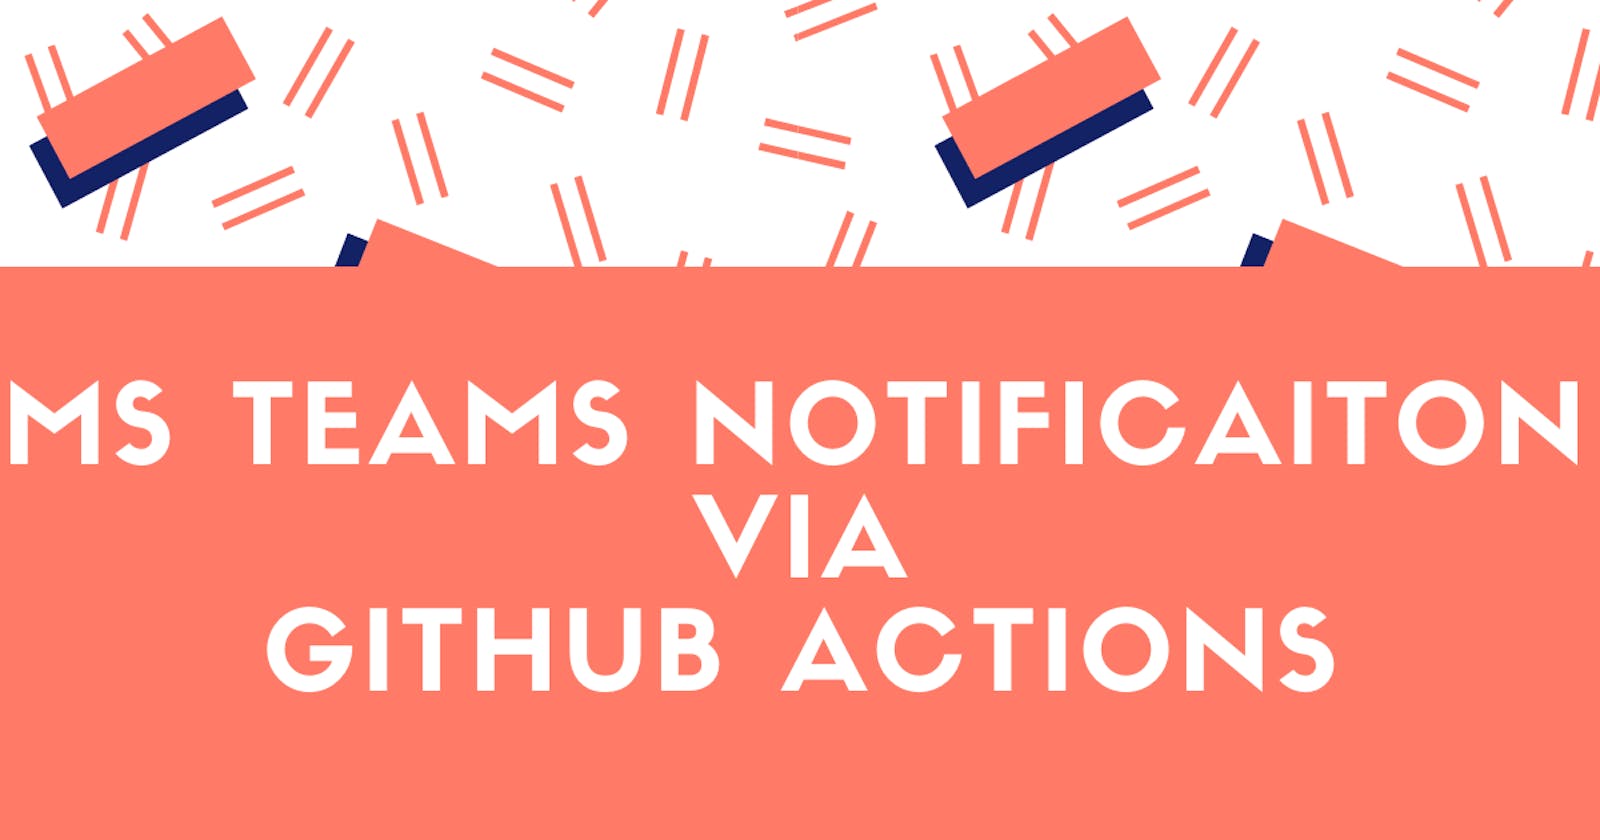 Github Actions - Sending Notifications to MS Teams